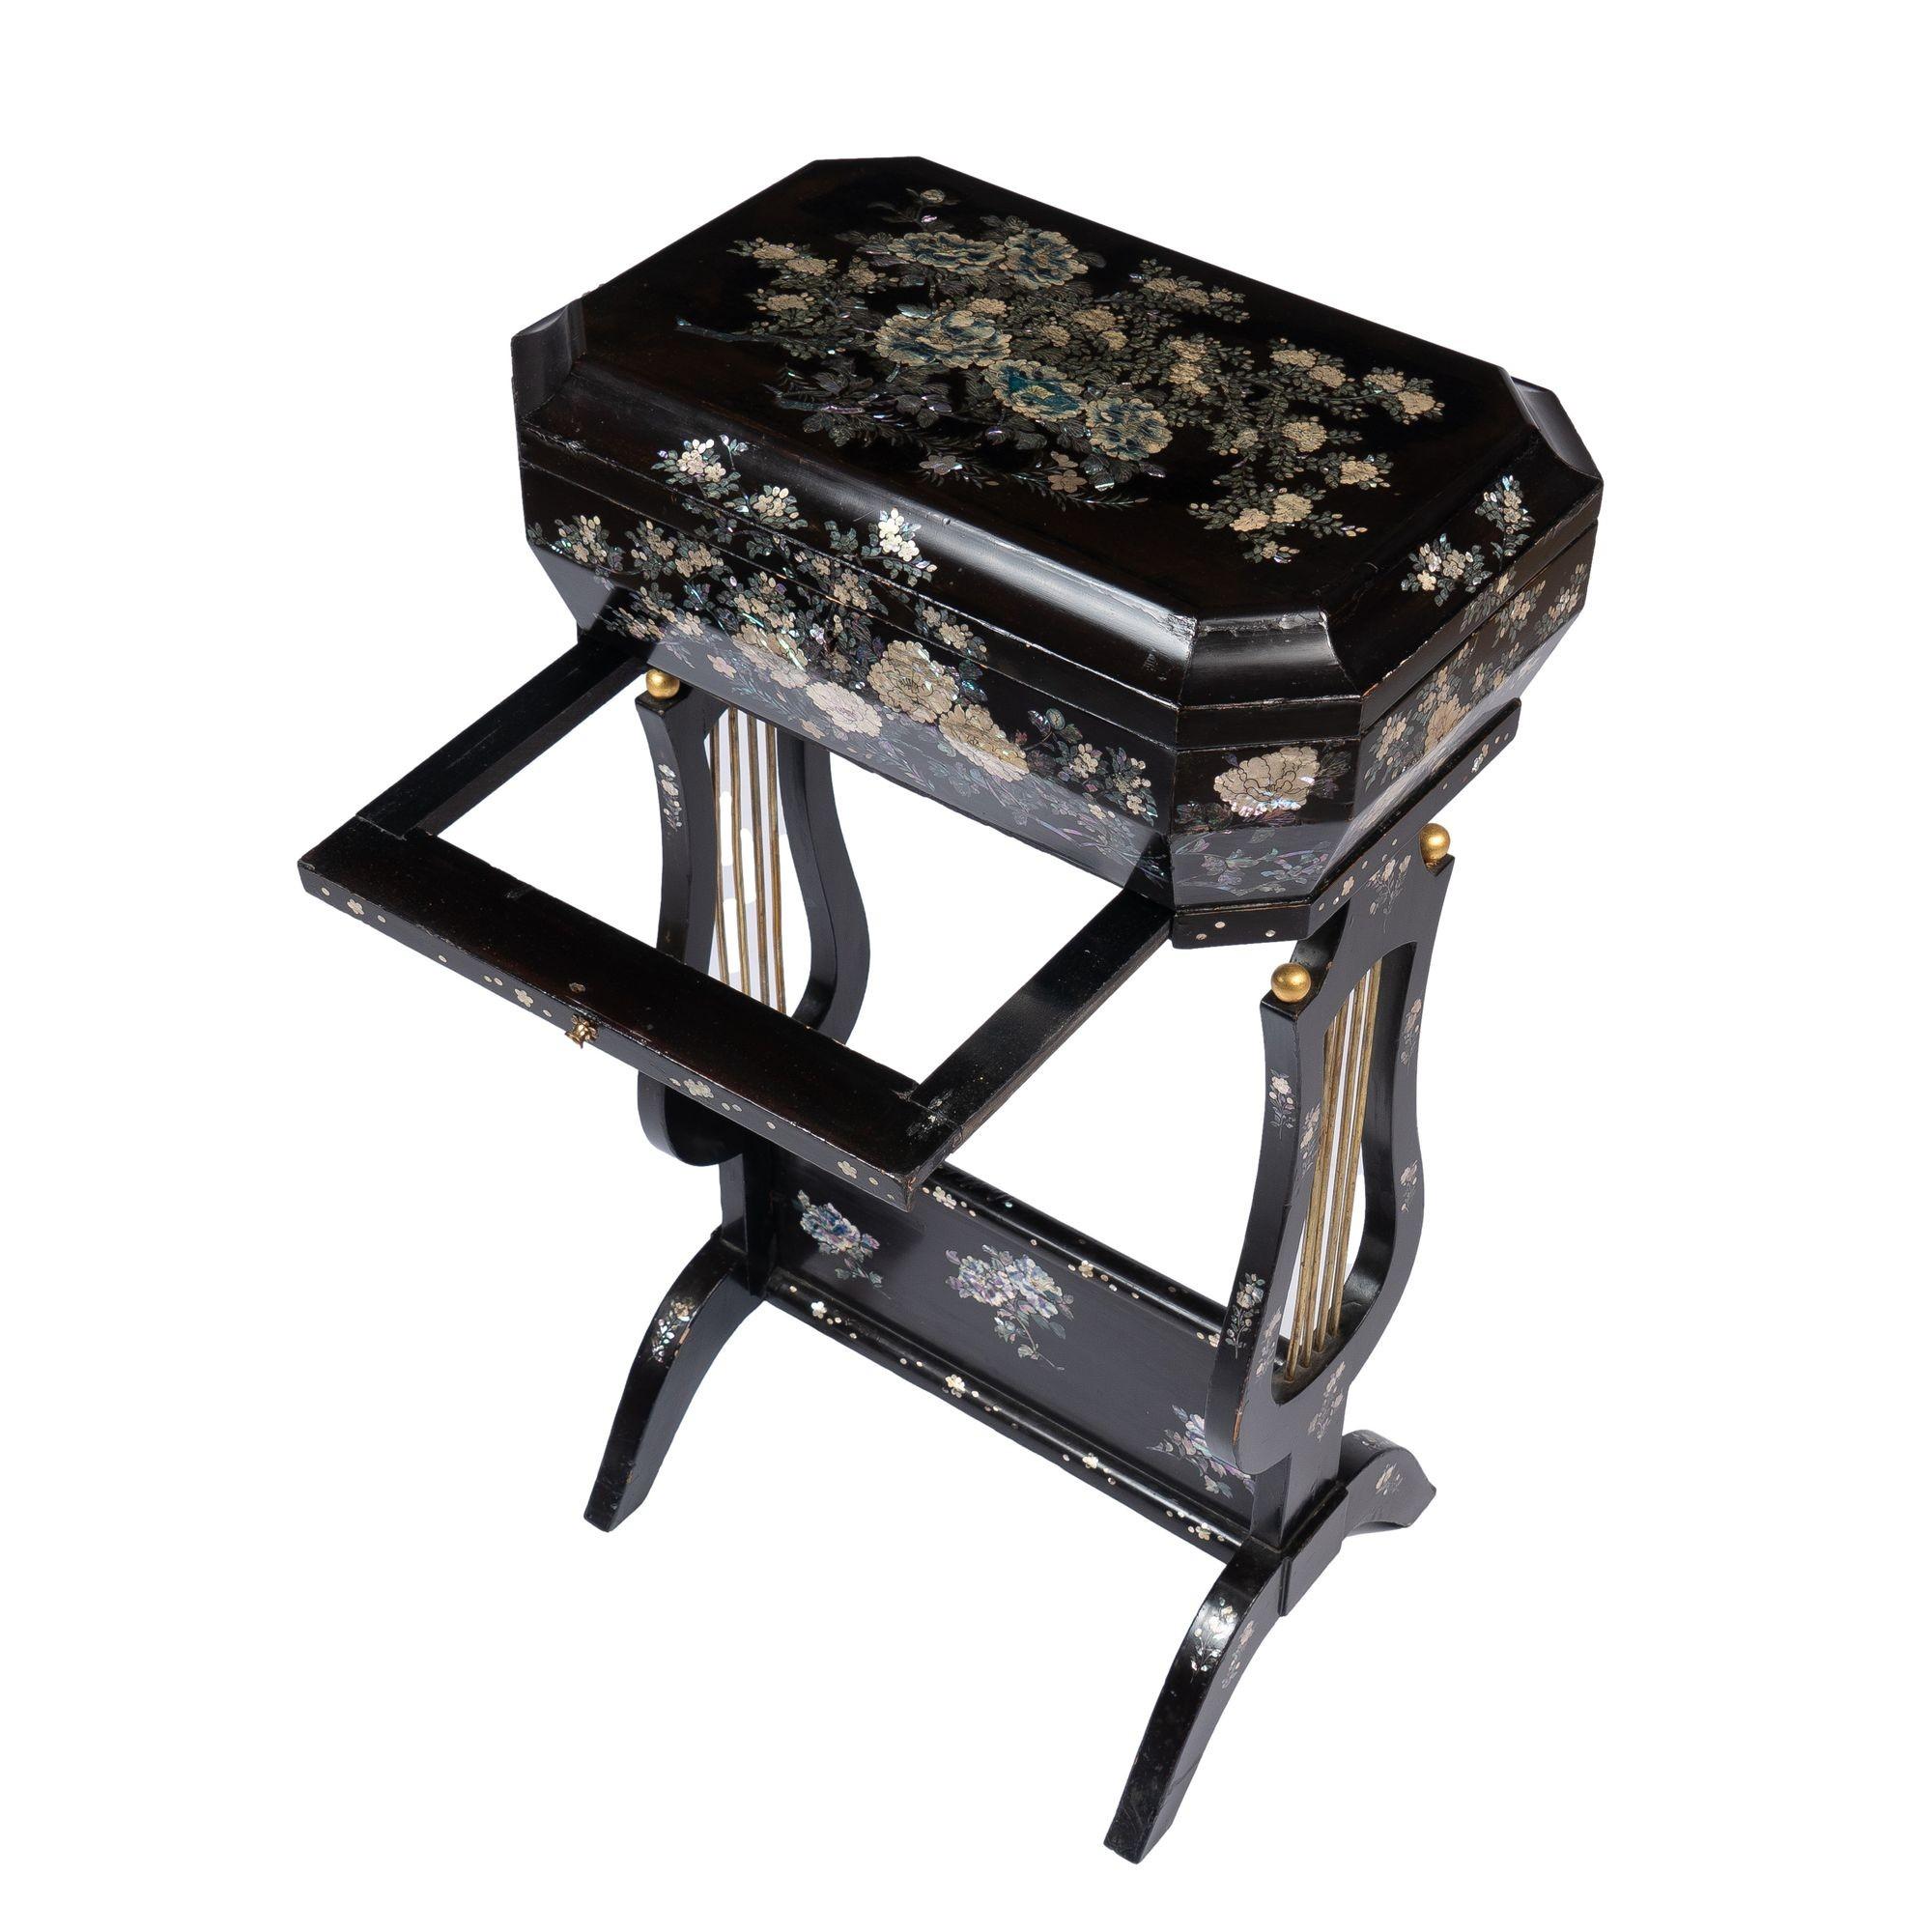 Japanese Lyre Base Sewing Box on Stand with Mother-Of Pearl Inlays, c. 1880 For Sale 4